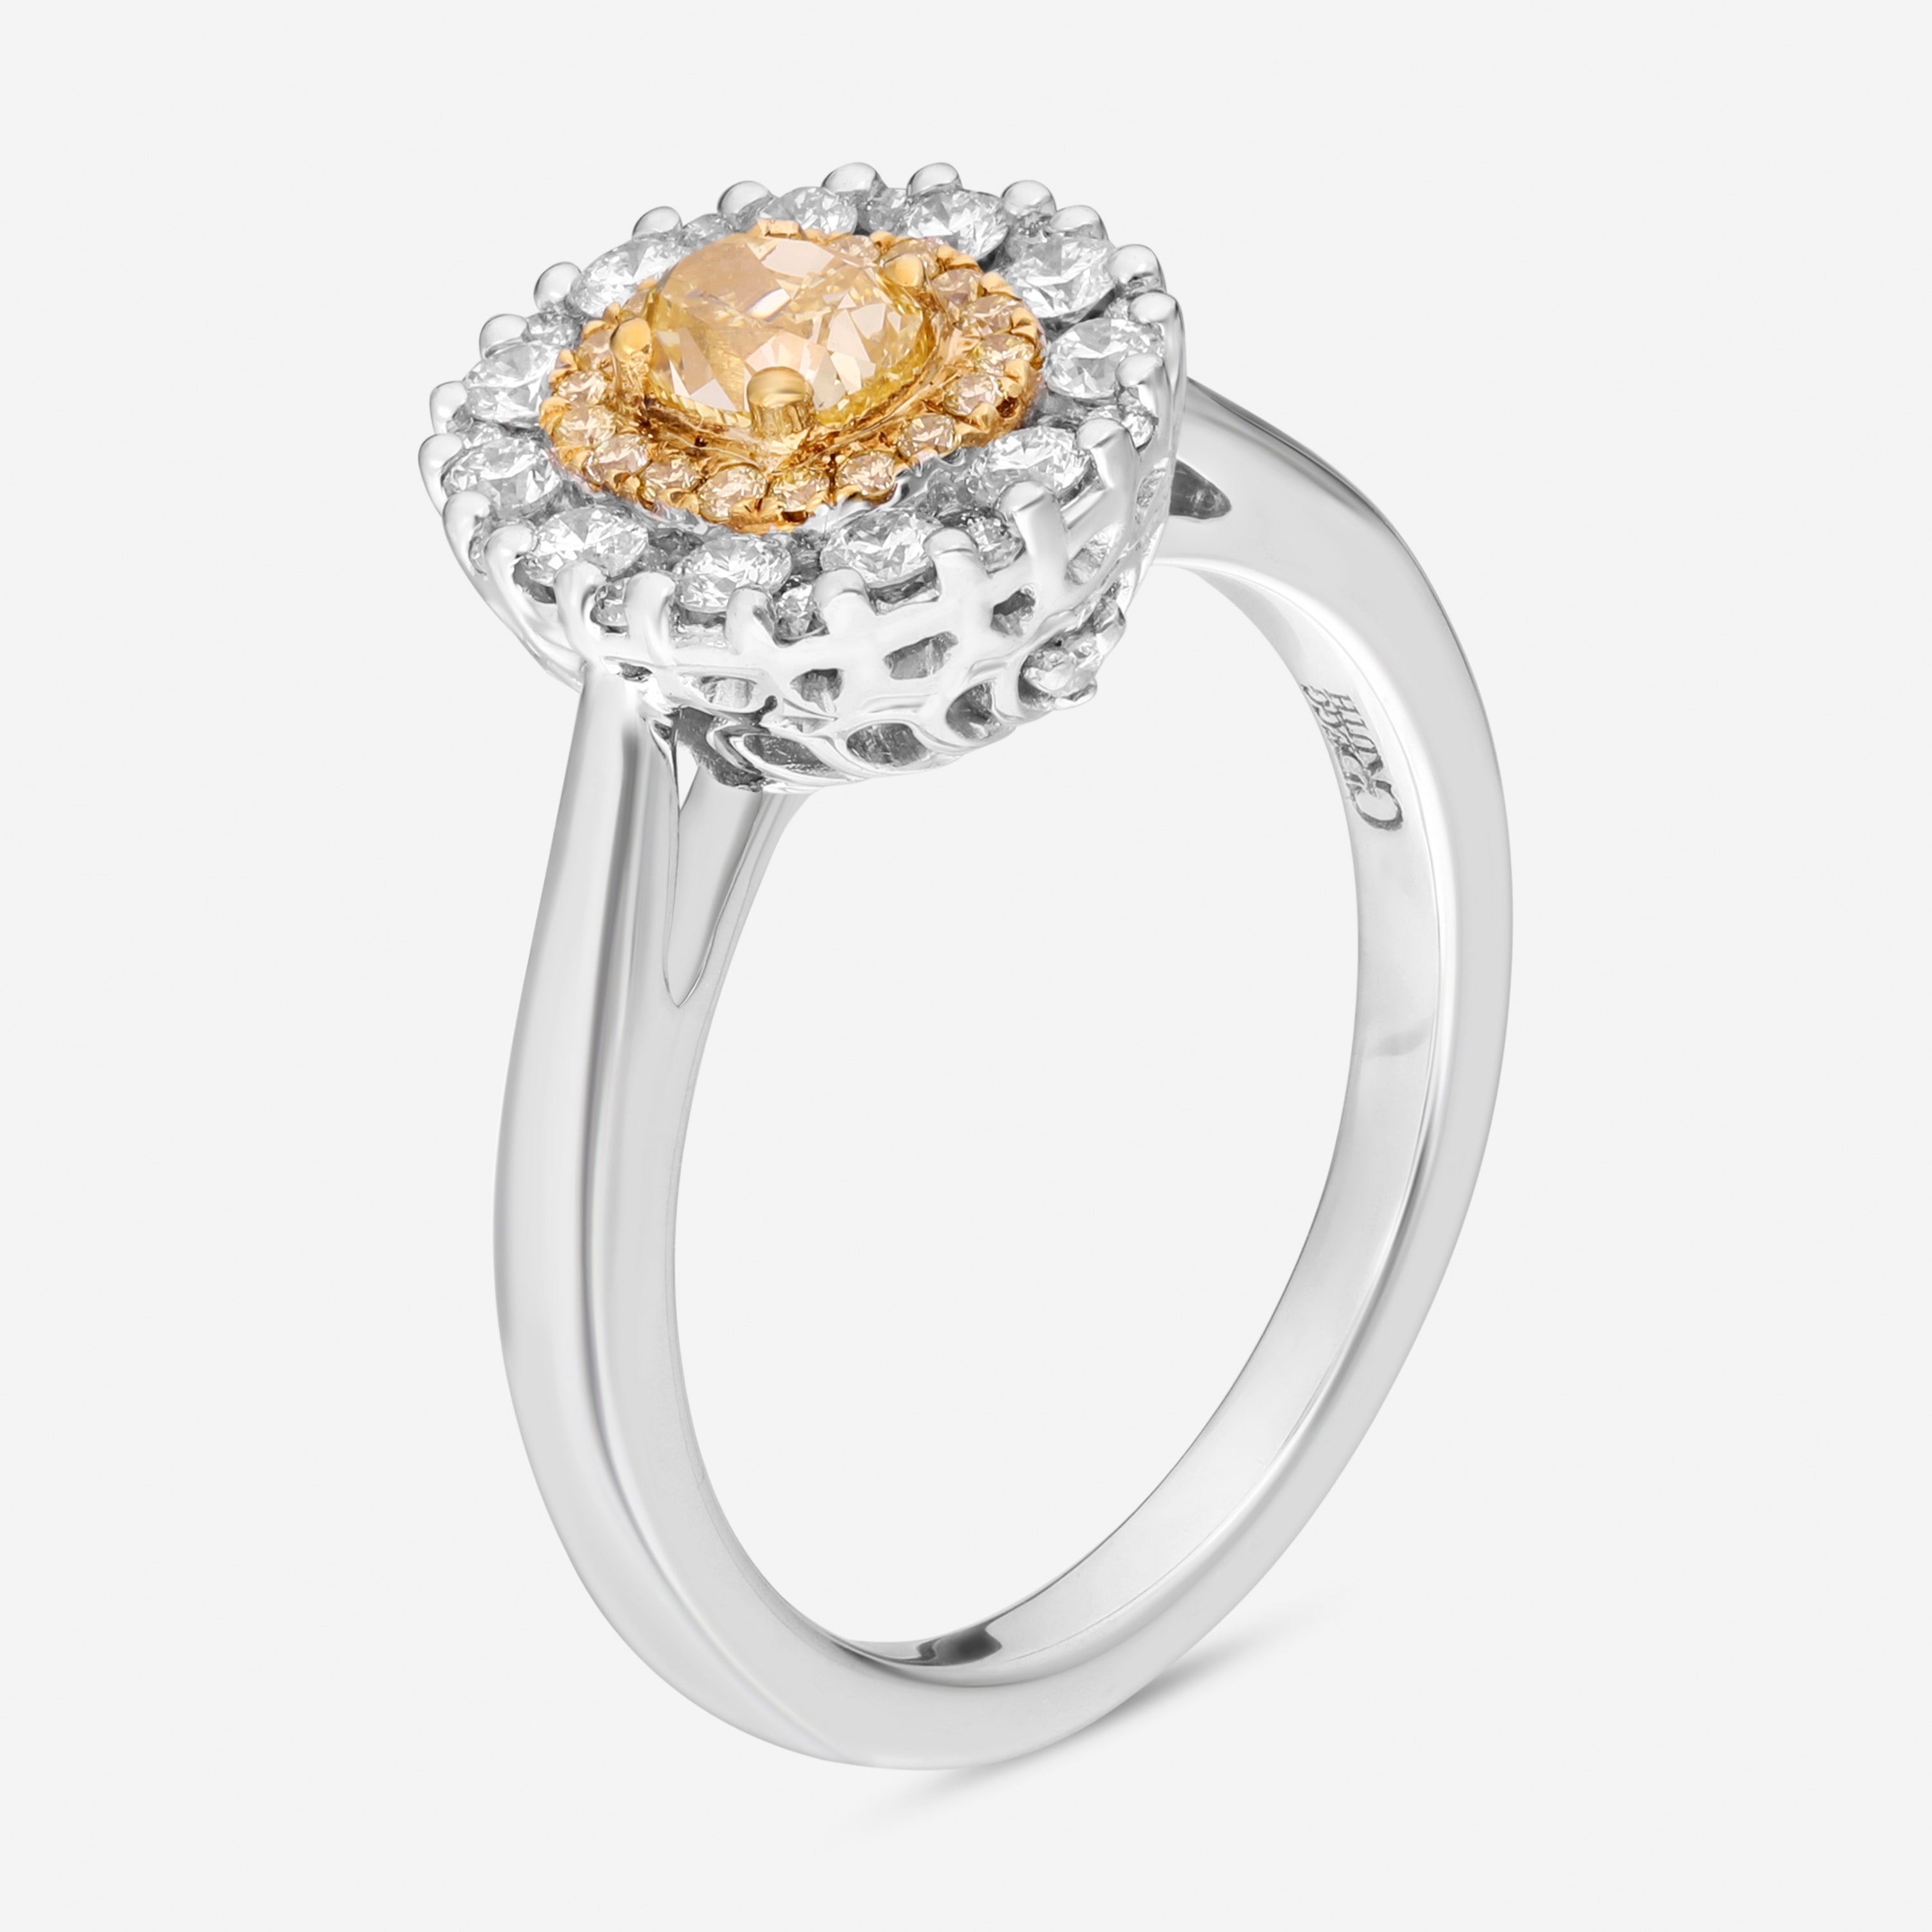 Gregg Ruth 18K White Gold, Fancy Yellow Diamond 0.56ct. and White Diamond 0.44ct. tw. Engagement Ring Sz. 6.5 602512-GCR/000917.108 - THE SOLIST